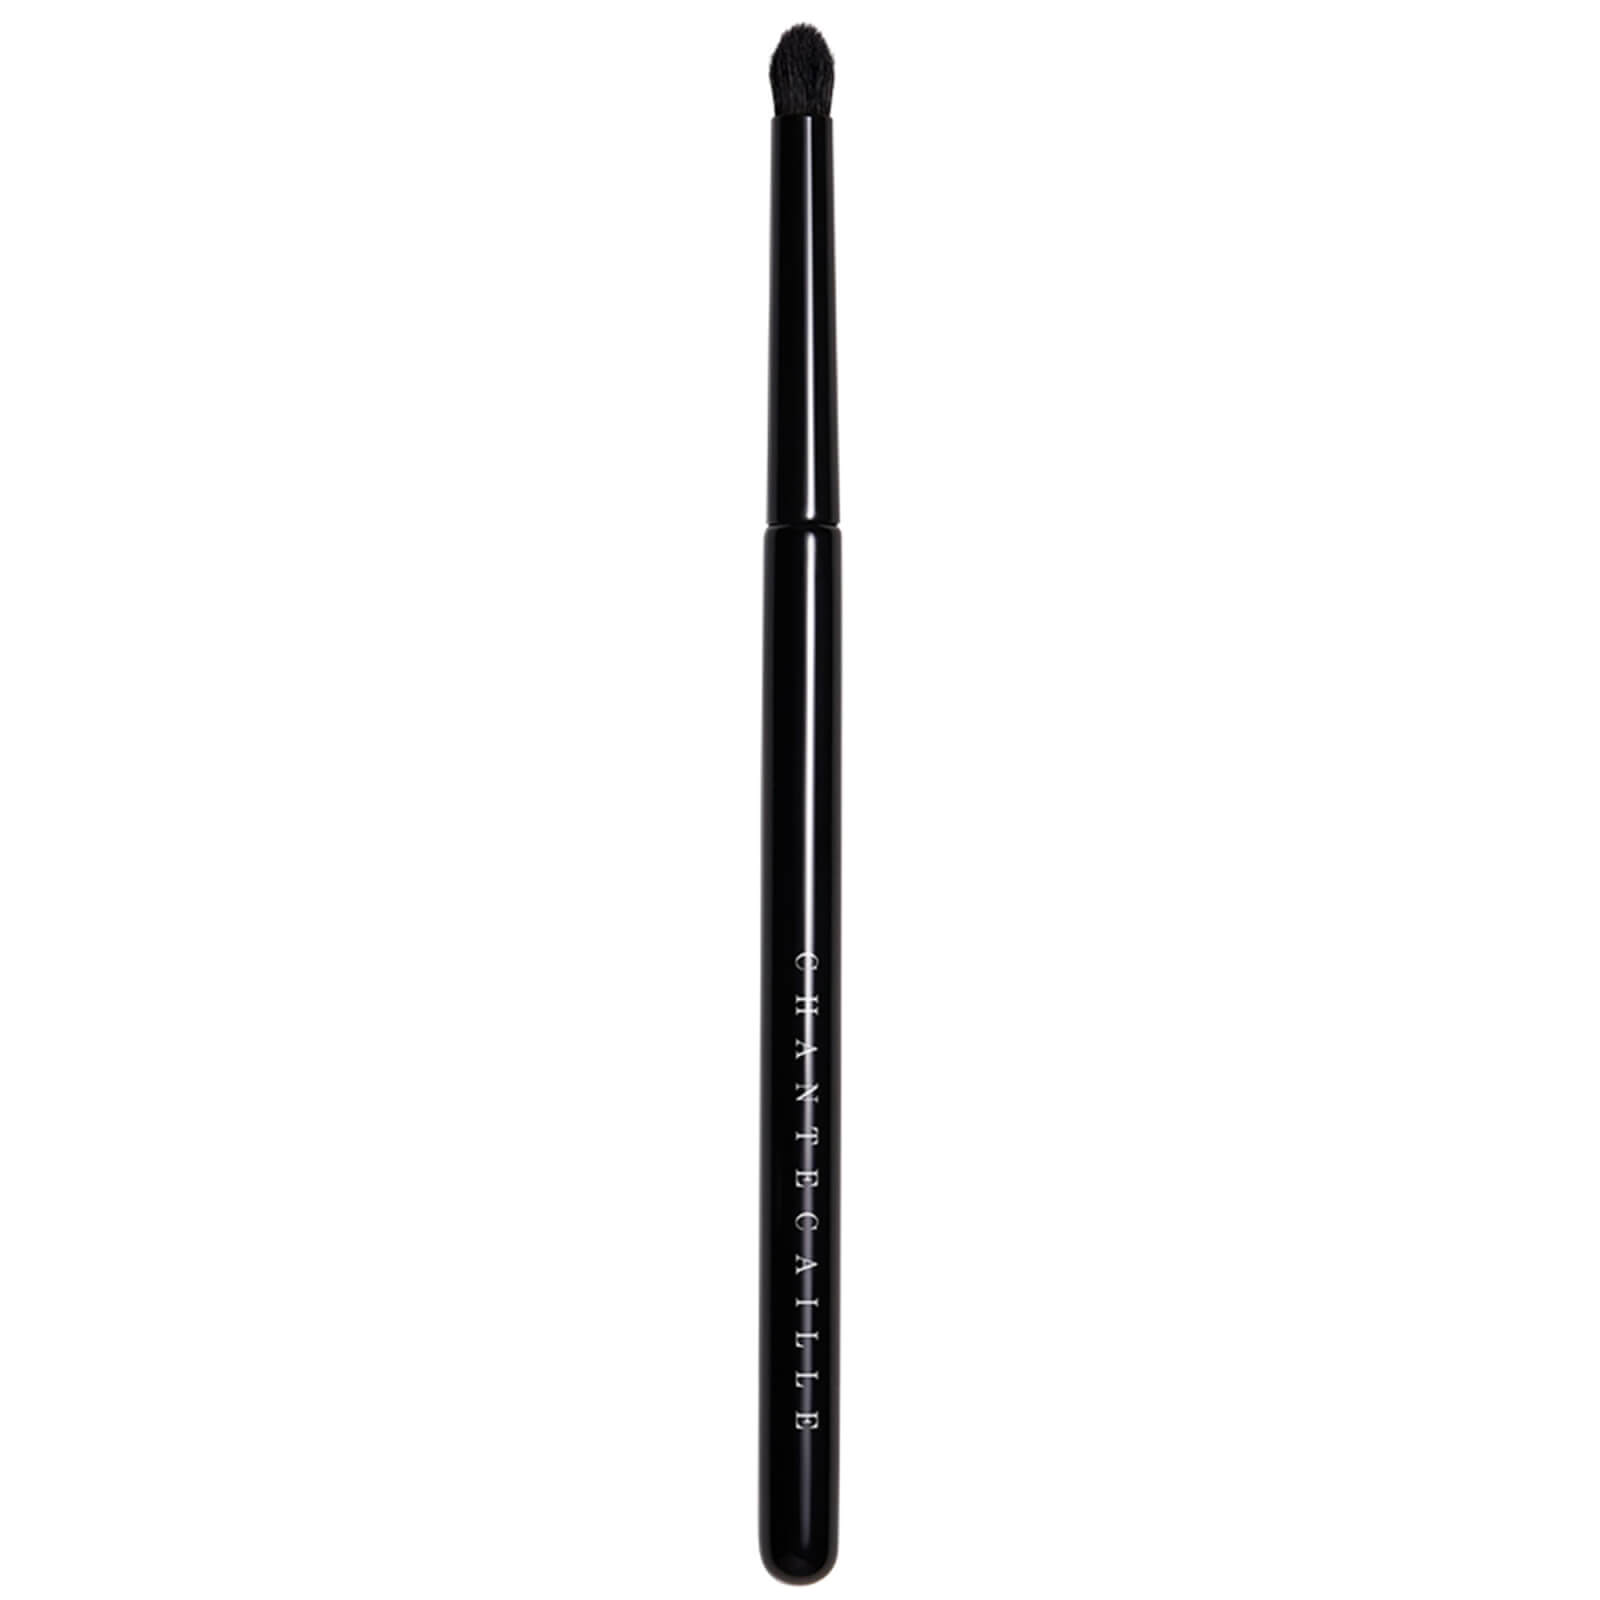 Image of Chantecaille Precision Blend Brush